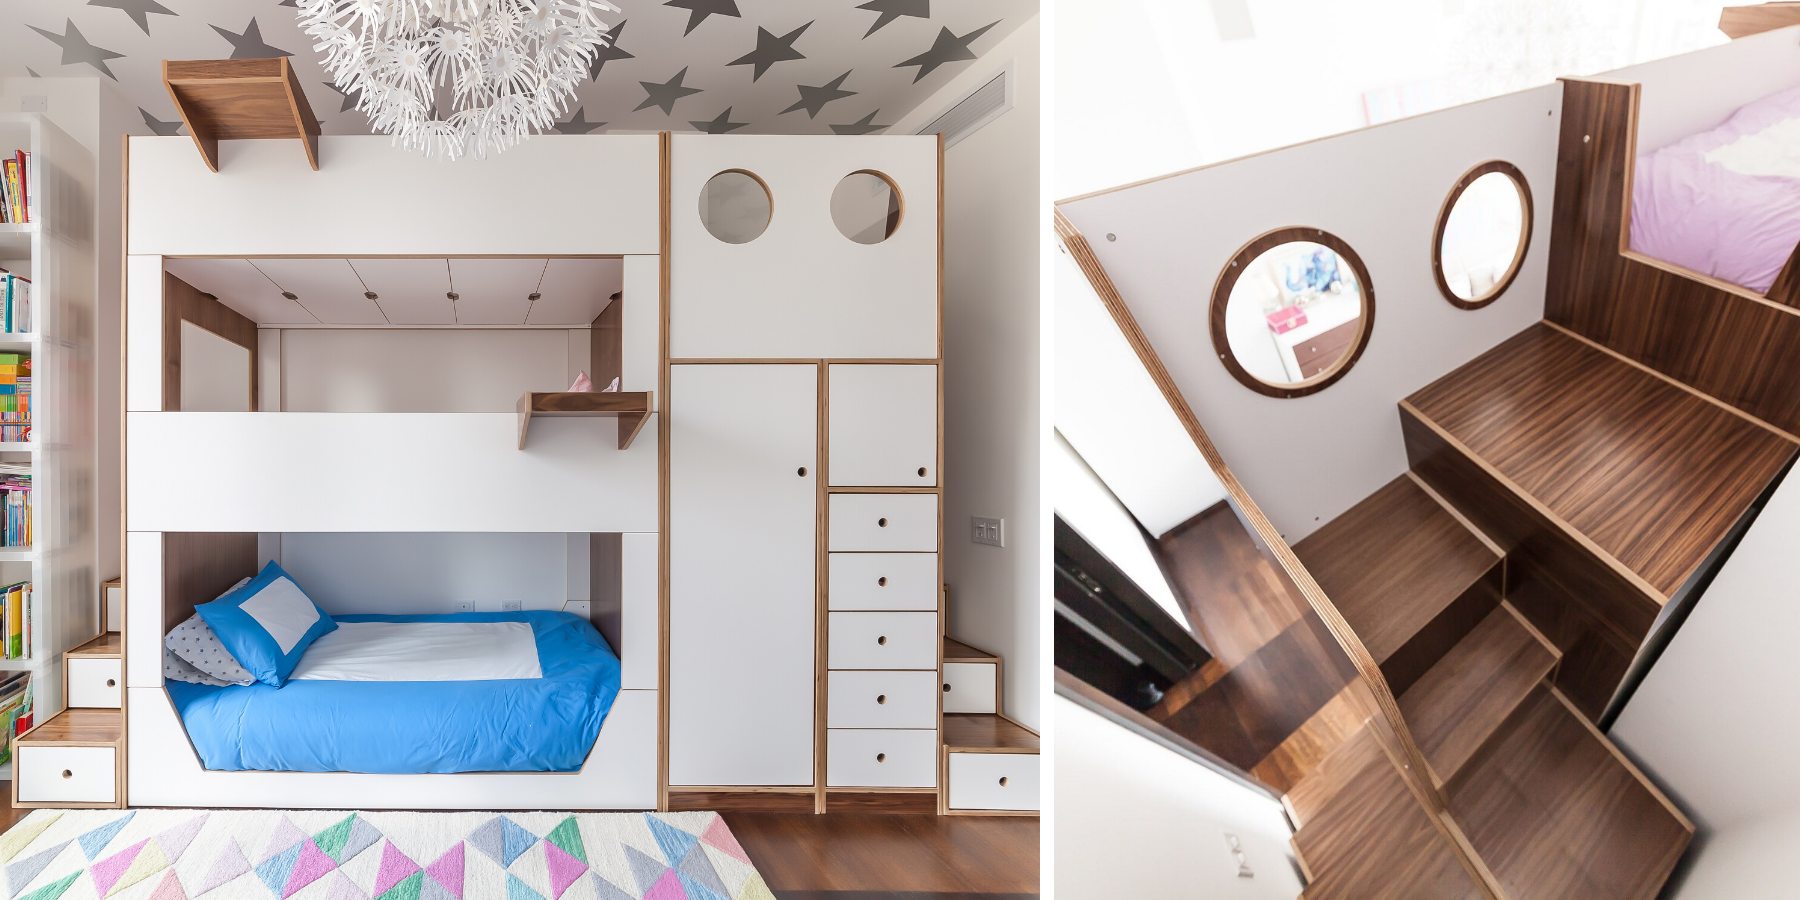 Two views of a children's room featuring bunk beds with starry ceiling and built-in staircase storage.